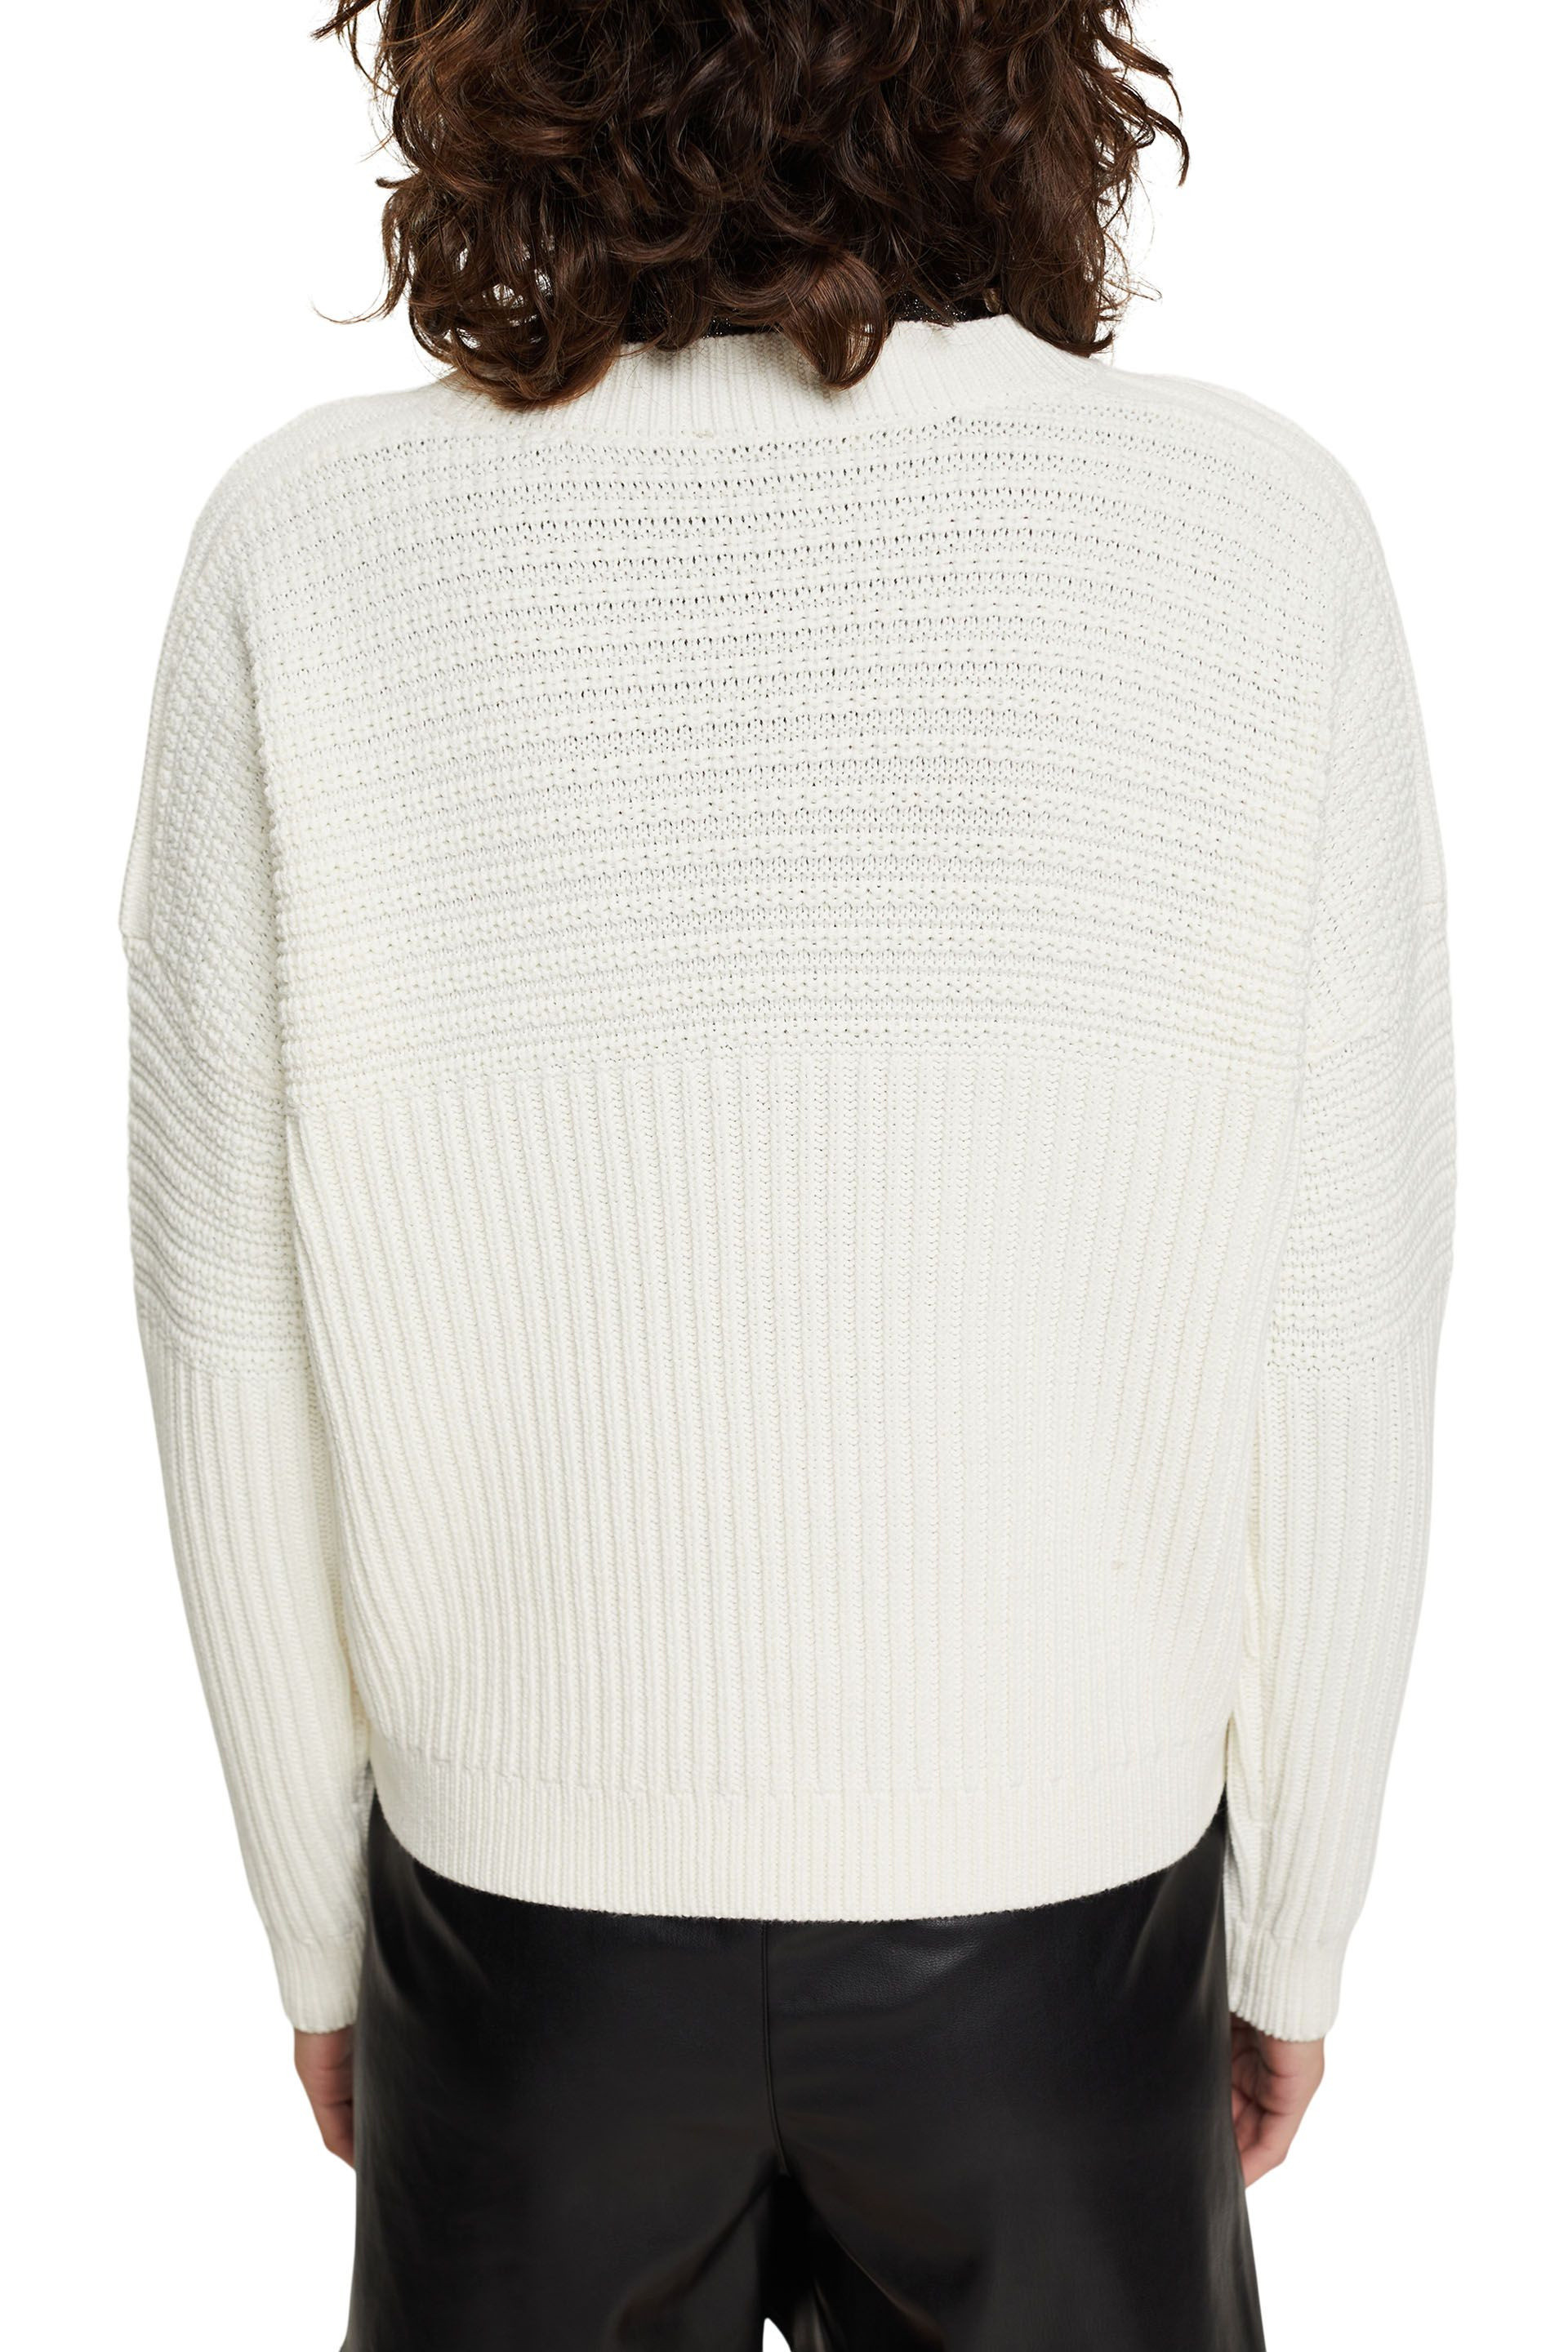 Esprit - Pullover in maglia chunky in misto cotone, Bianco, large image number 2